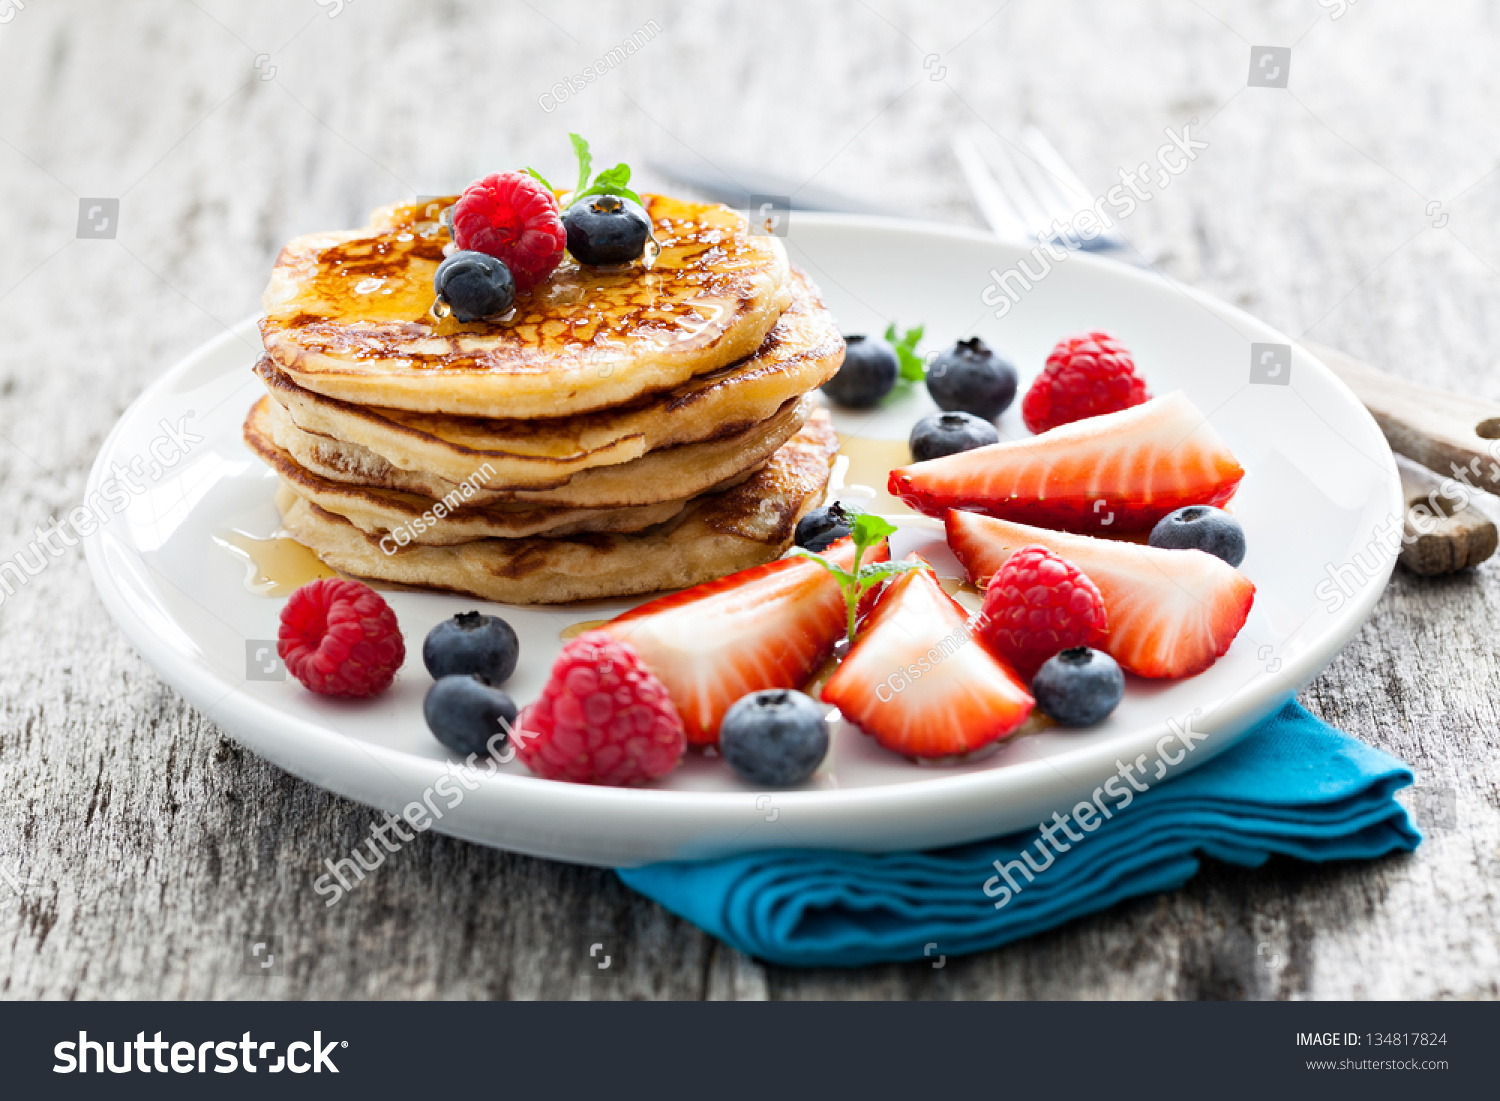 Fresh Pancakes With Fruits Stock Photo 134817824 : Shutterstock